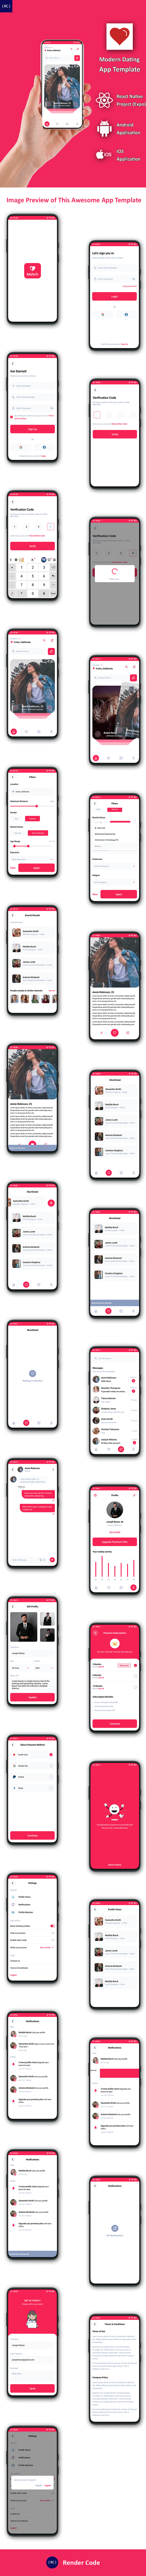 Online Dating and Chatting App Template | Swipe, Chatting | Modern Dating app | React Native | Match - 7